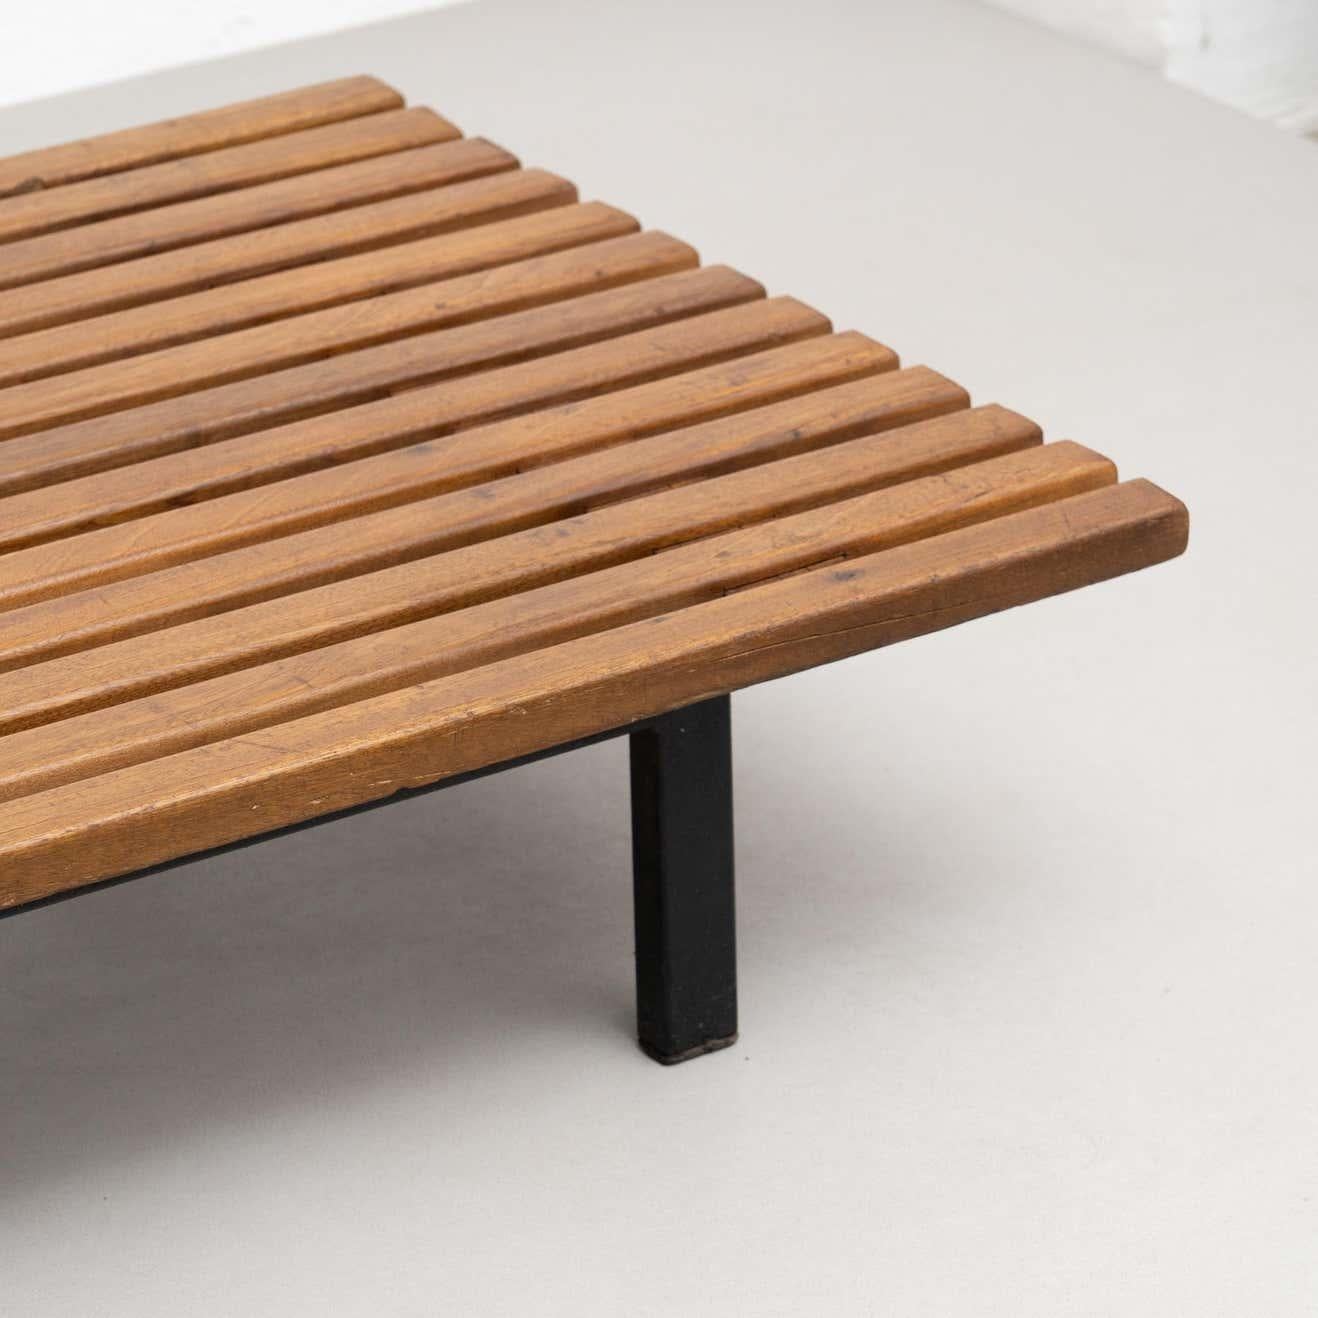 Charlotte Perriand Cansado Bench with a Drawer, circa 1958 For Sale 1